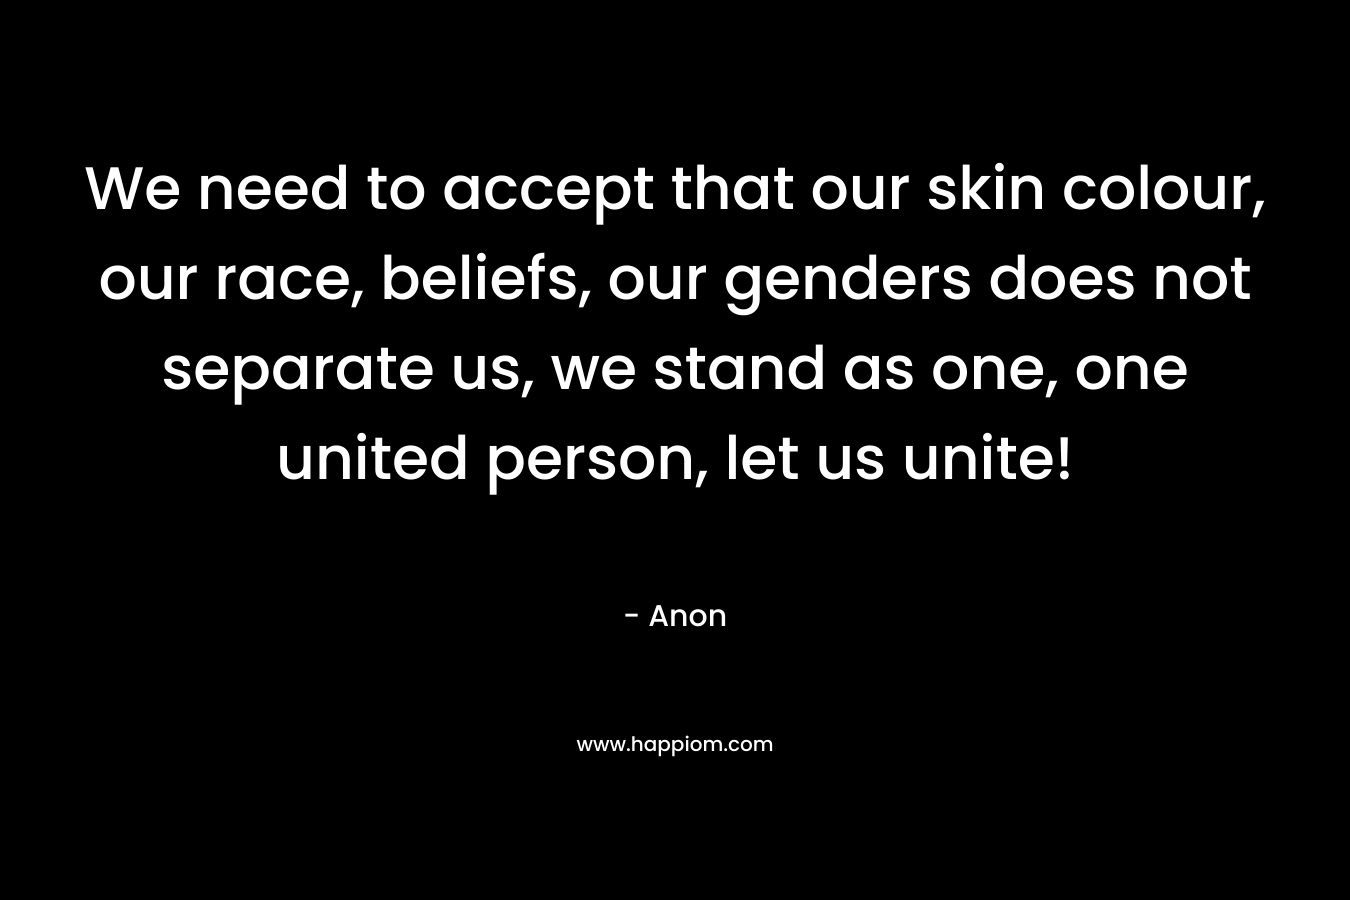 We need to accept that our skin colour, our race, beliefs, our genders does not separate us, we stand as one, one united person, let us unite! – Anon